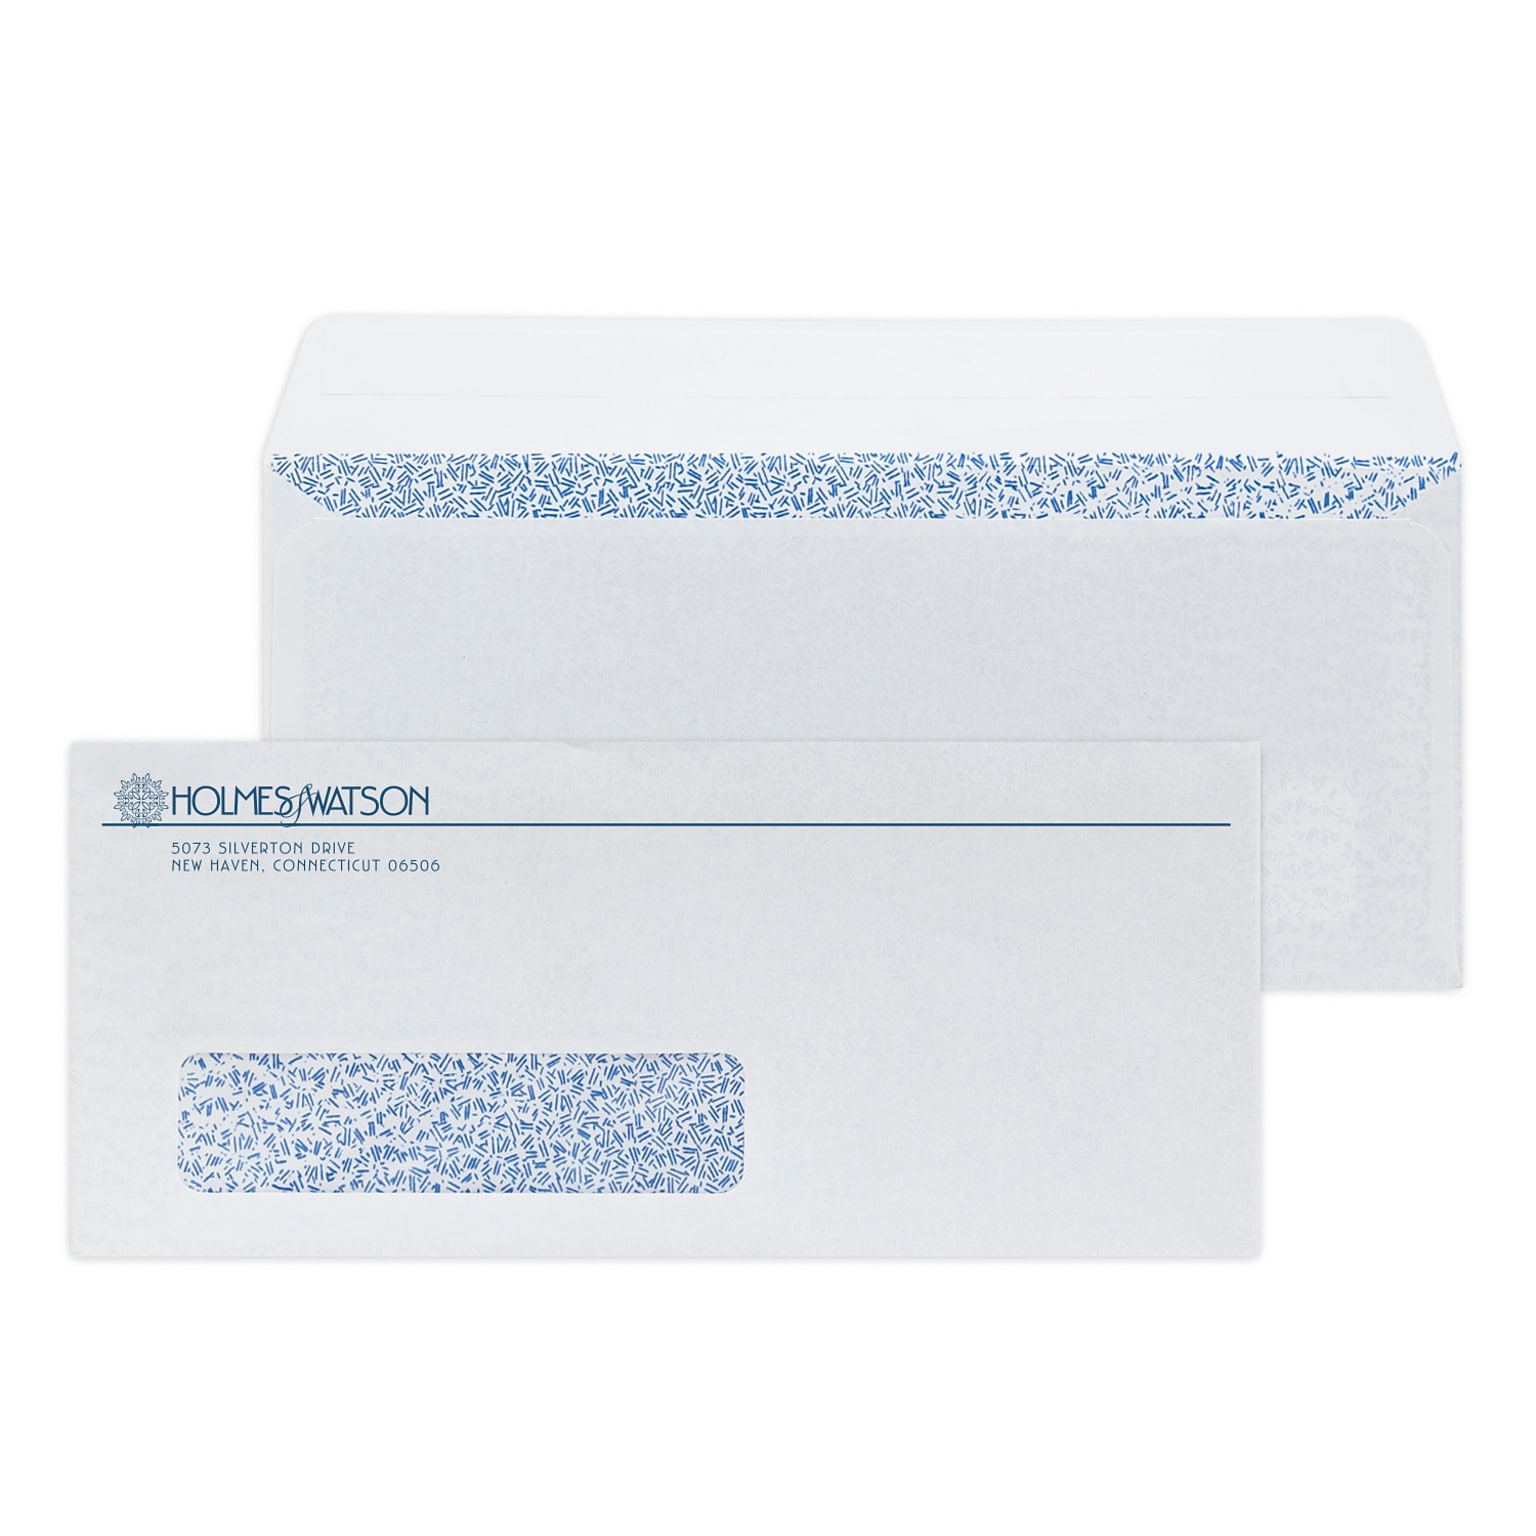 Custom #10 Peel and Seal Window Envelopes with Security Tint, 4 1/4 x 9 1/2, 24# White Wove, 1 Custom Ink, 250 / Pack